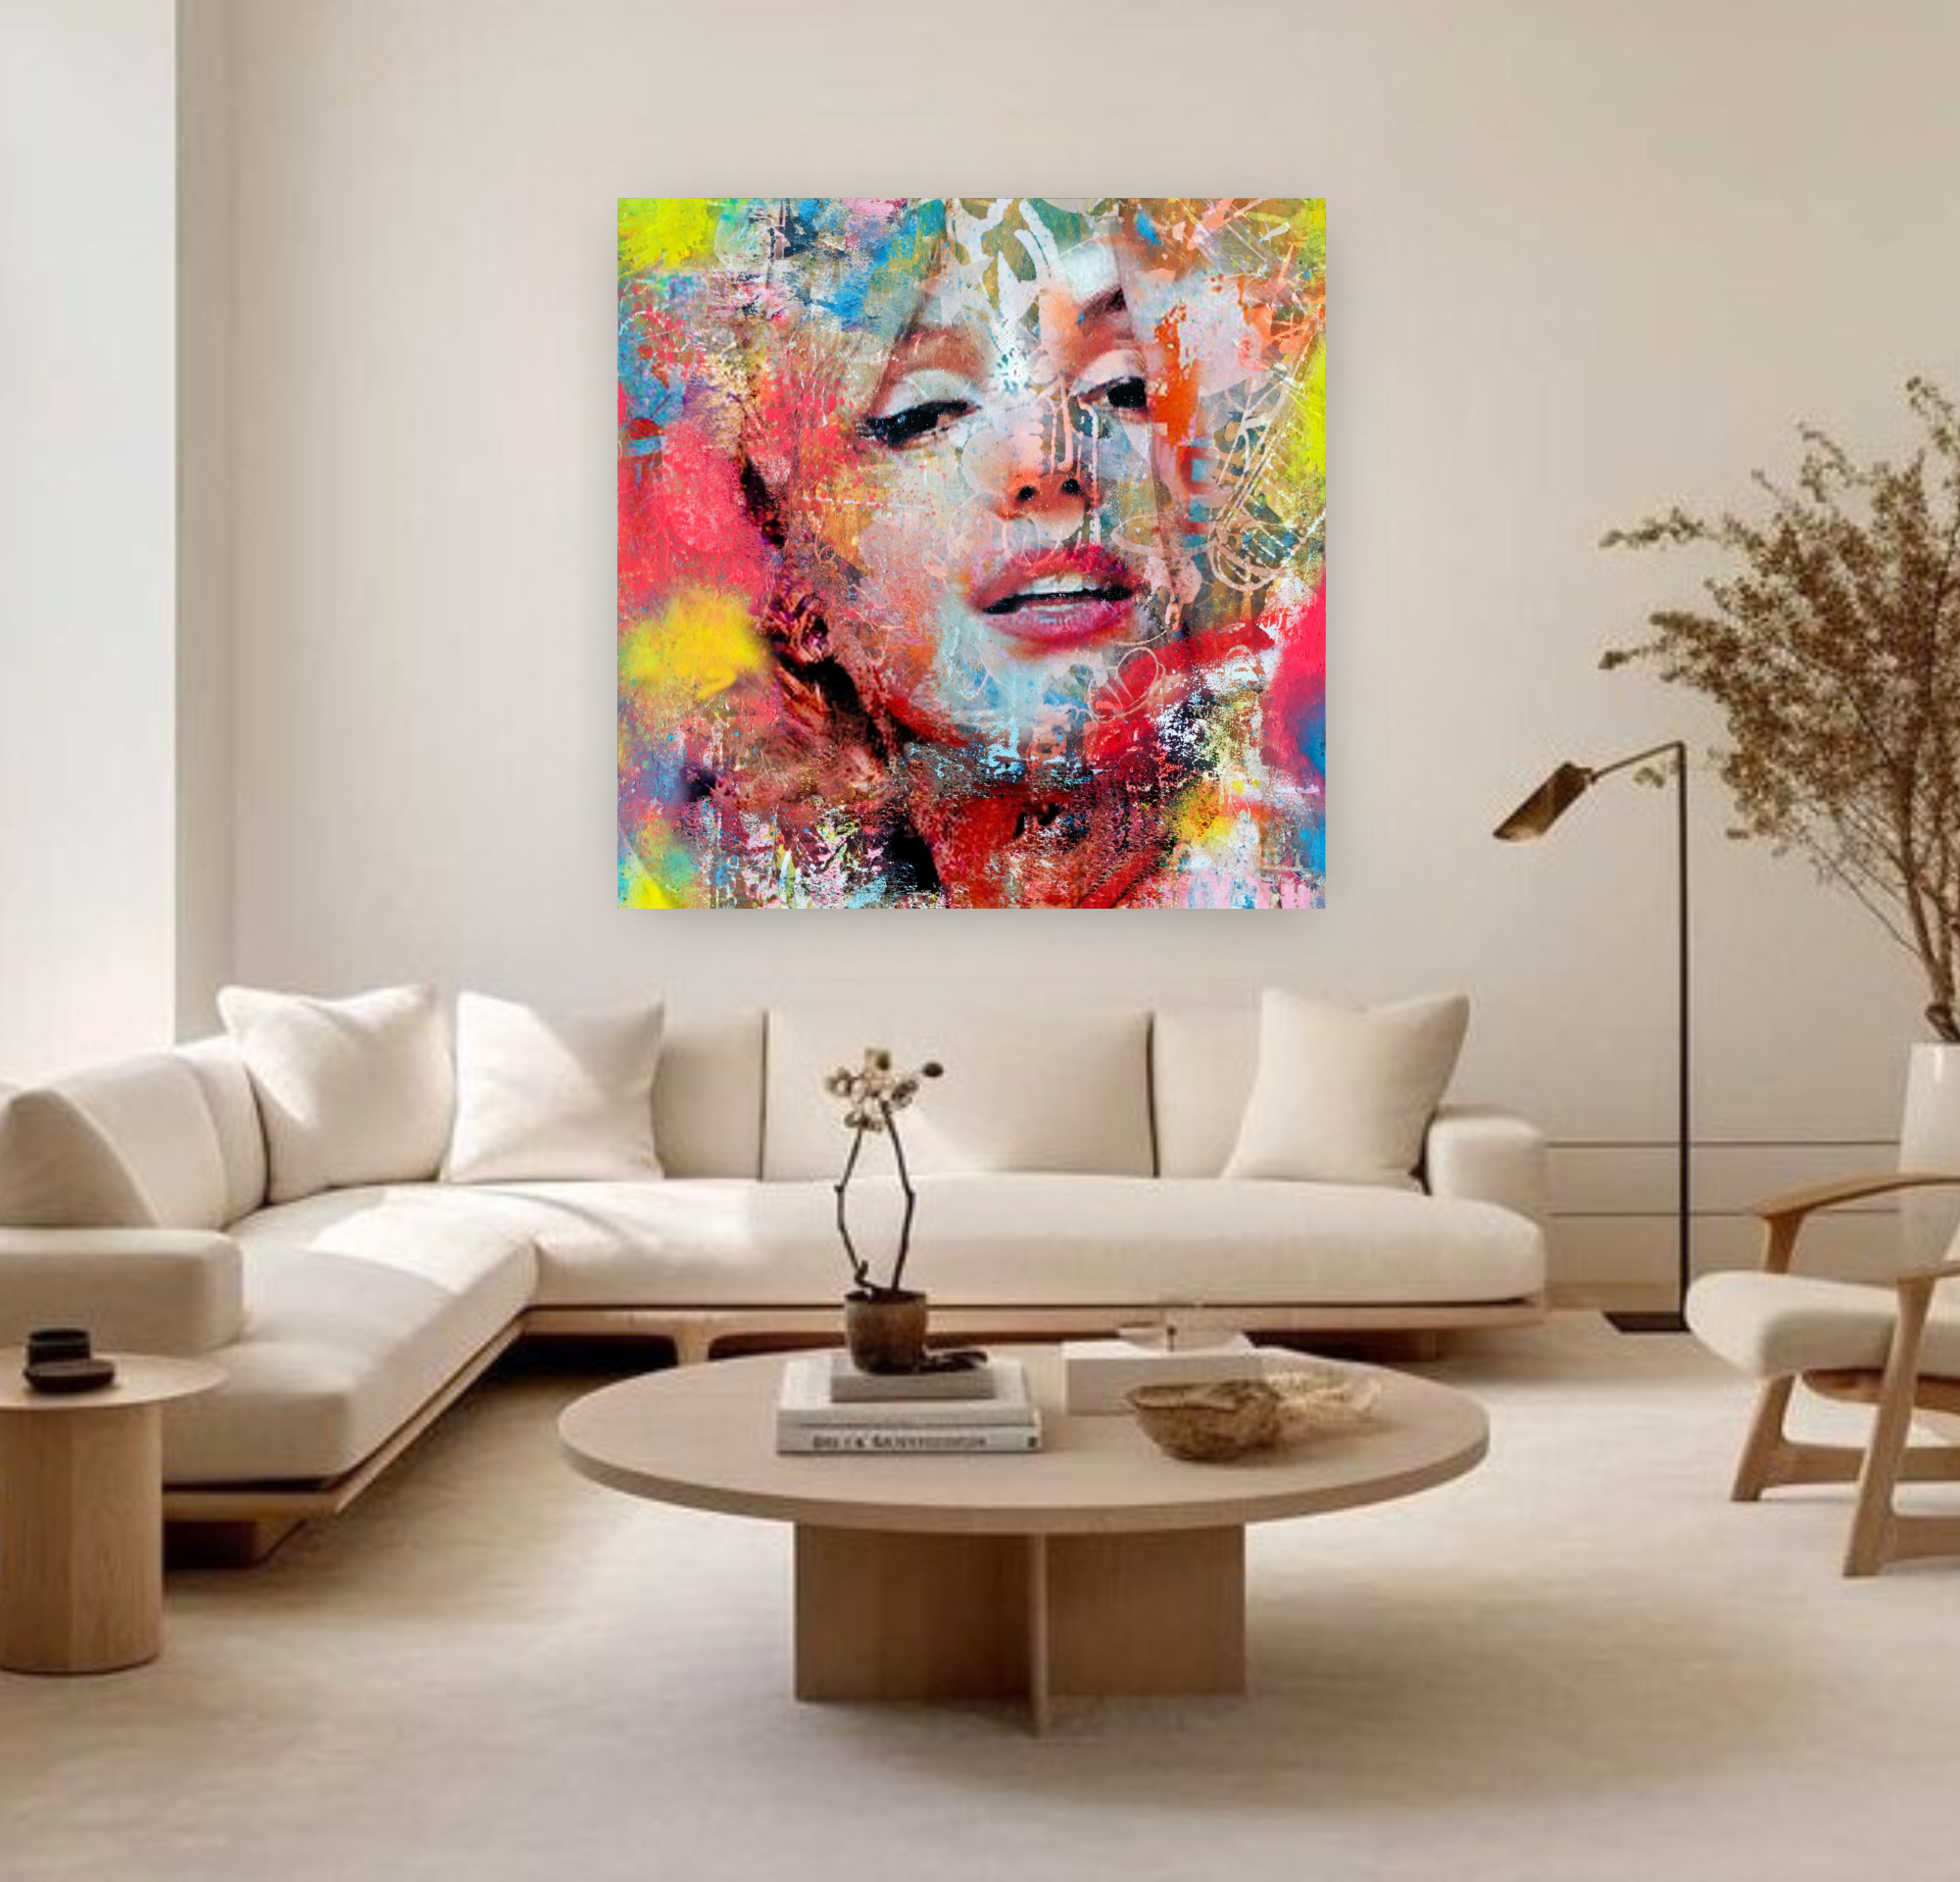 Colors Made My Day, Portrait on Canvas Queen Baeleit Art